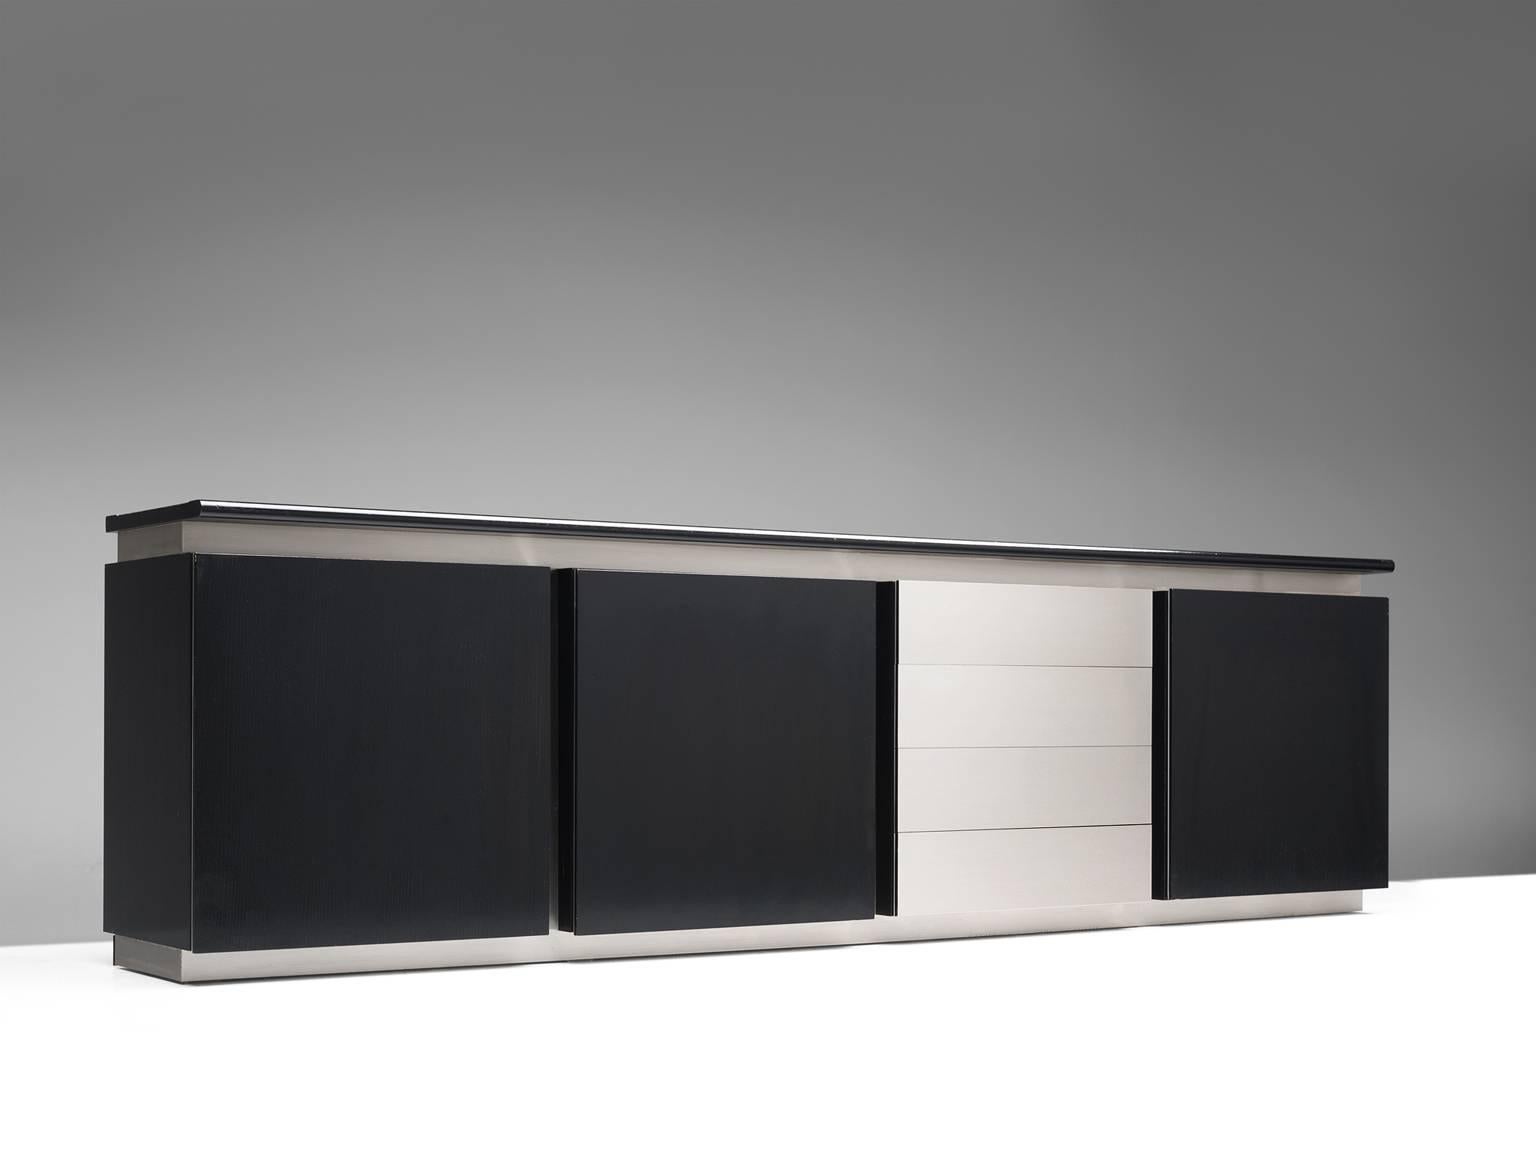 Ludovico Acerbis for Acerbis, credenza, oak and steel, 1970s, Italy.

Sleek and modern credenza in stainless steel and stained oak. This cabinet has both a contemporary yet monumental appearance. The design is simplistic and straight. The vertical